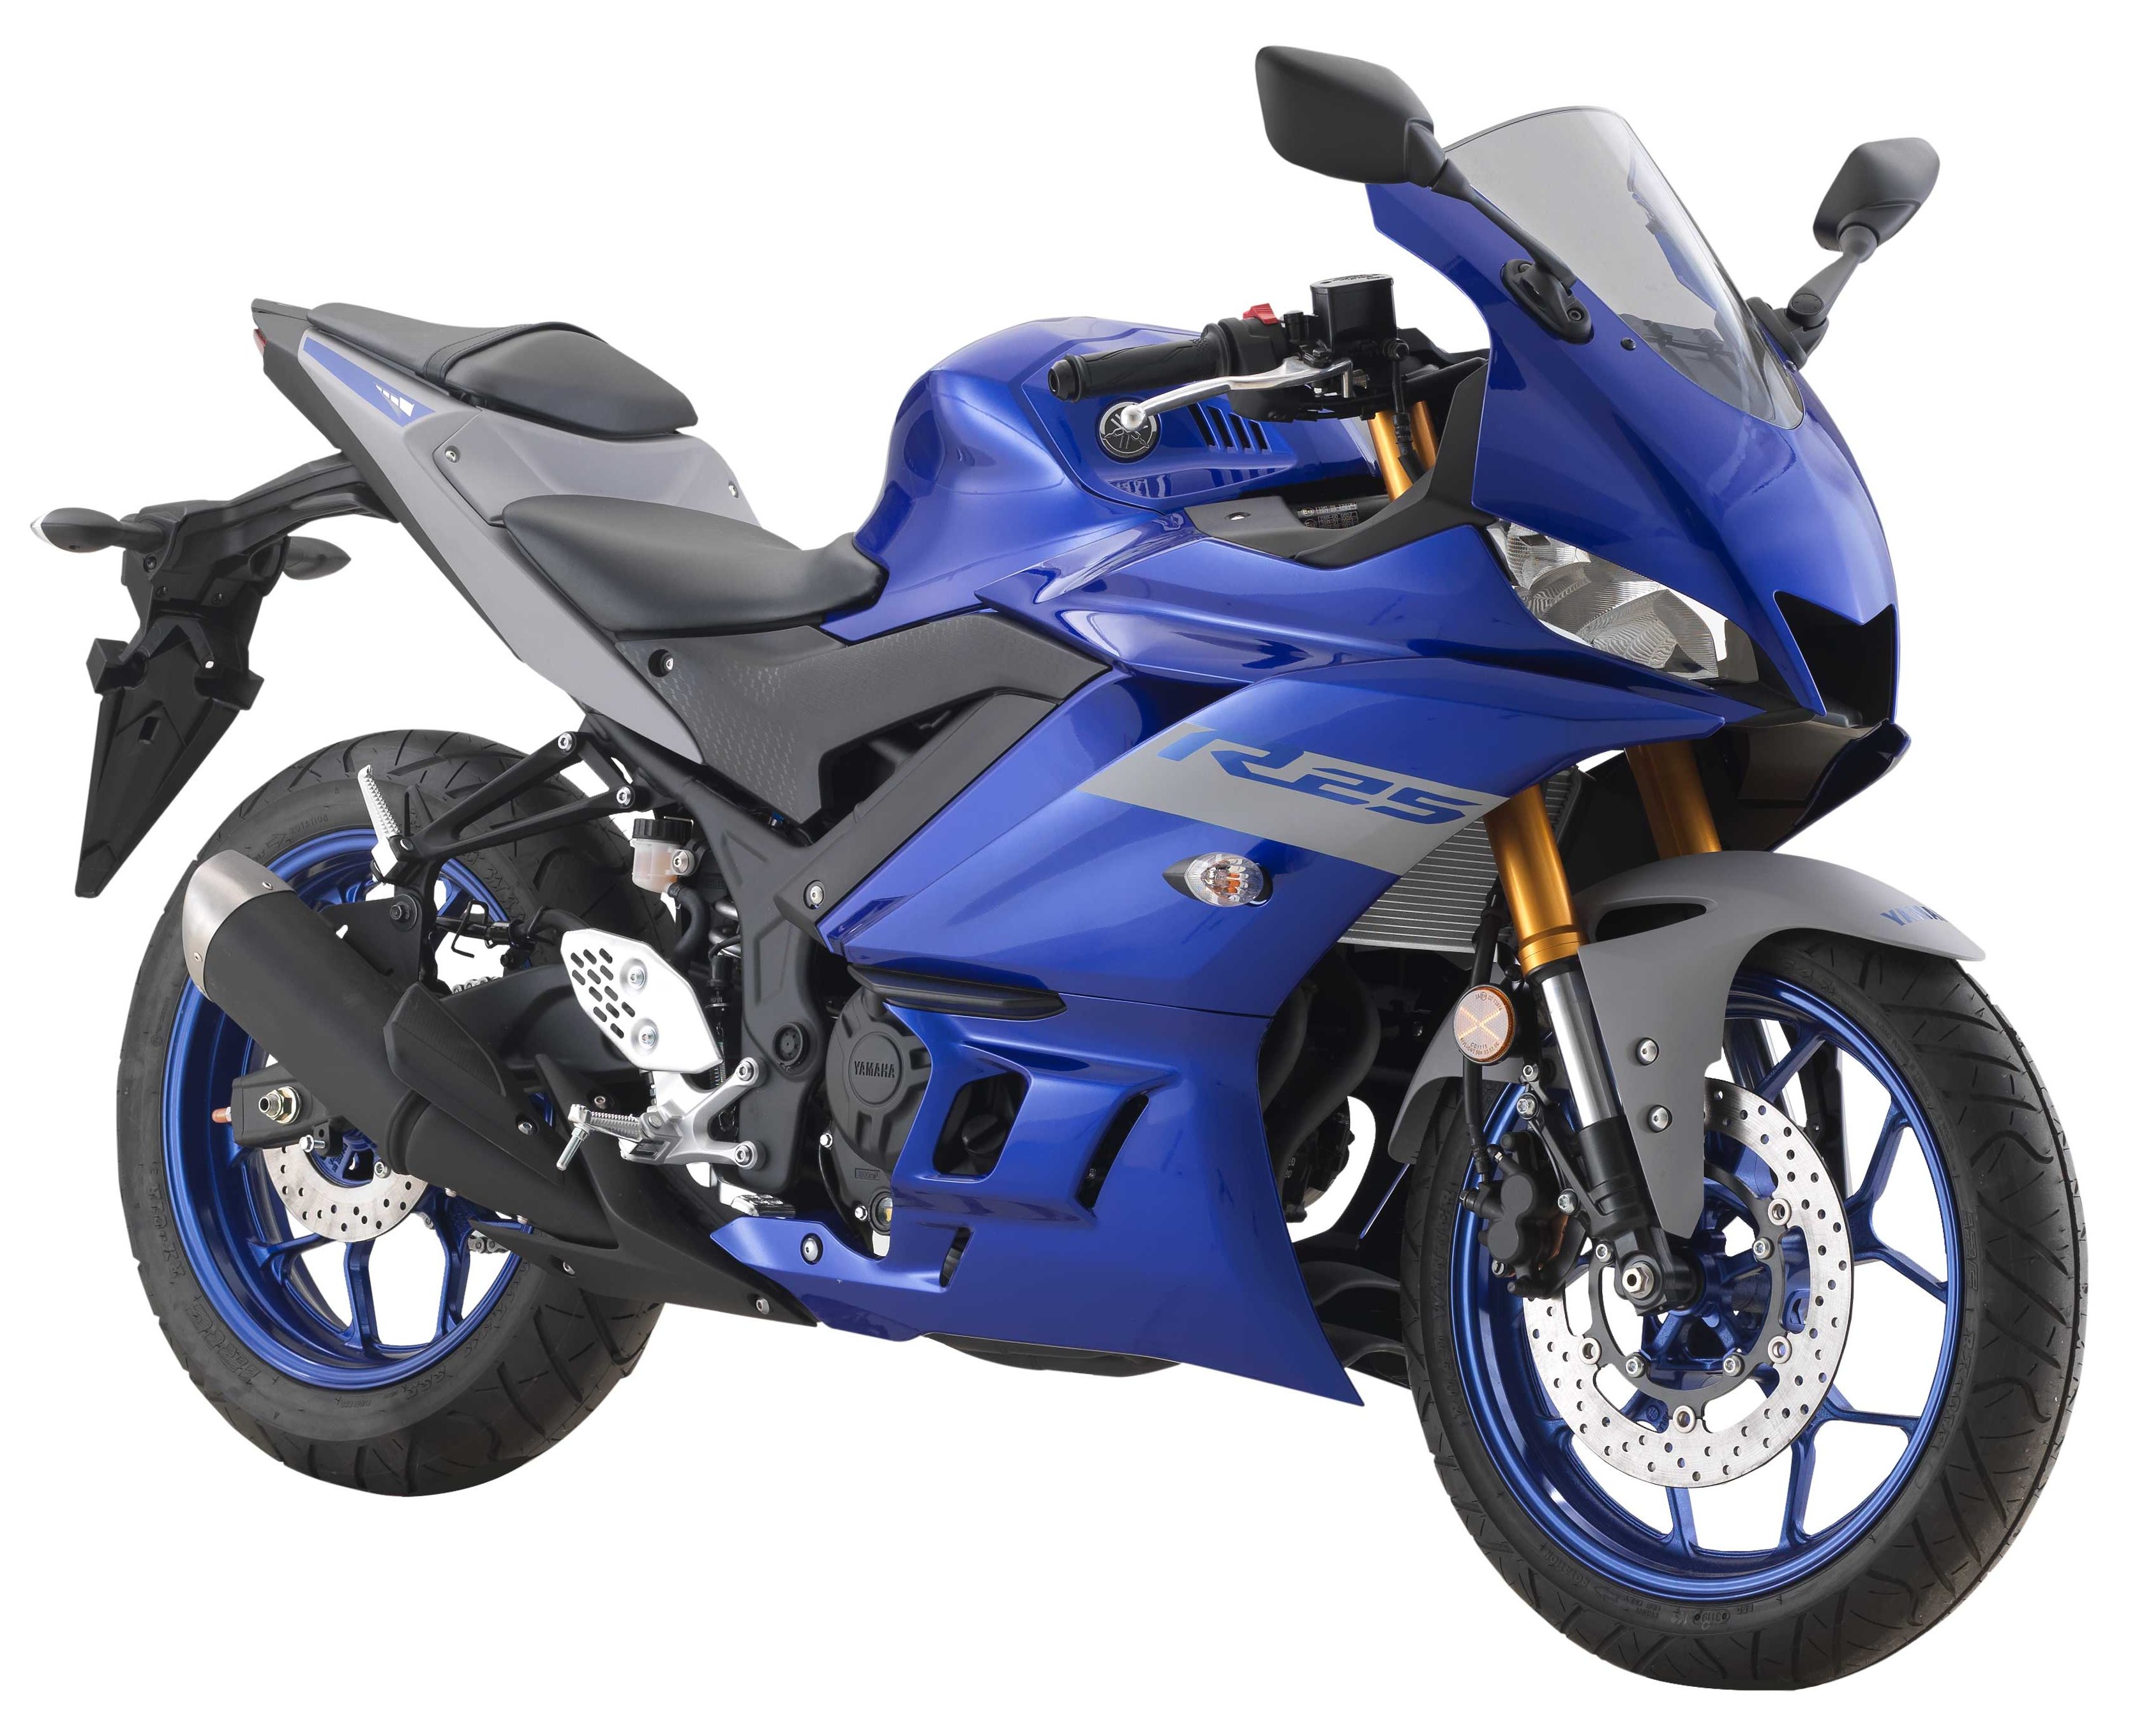 2020 Yamaha YZF-R25 Sports Bike Officially Revealed - right